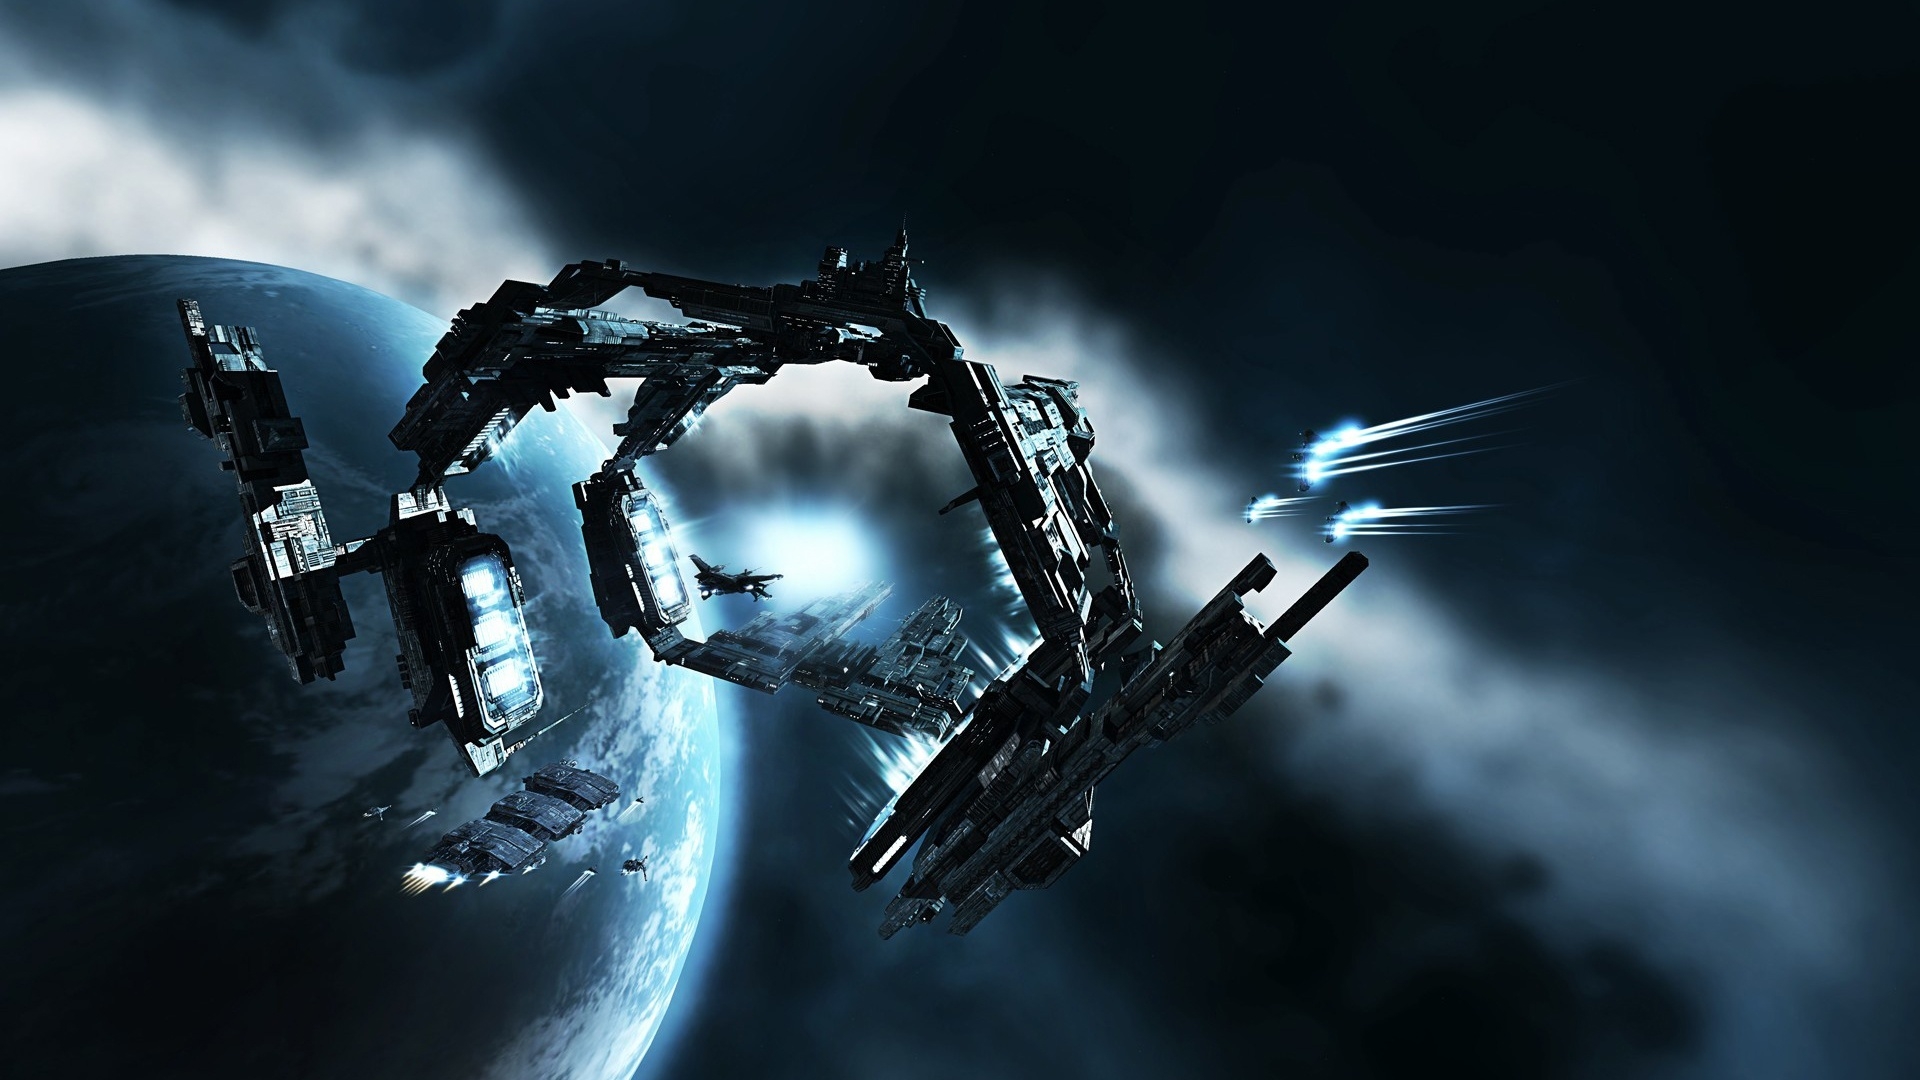 Eve Space Station for 1920 x 1080 HDTV 1080p resolution